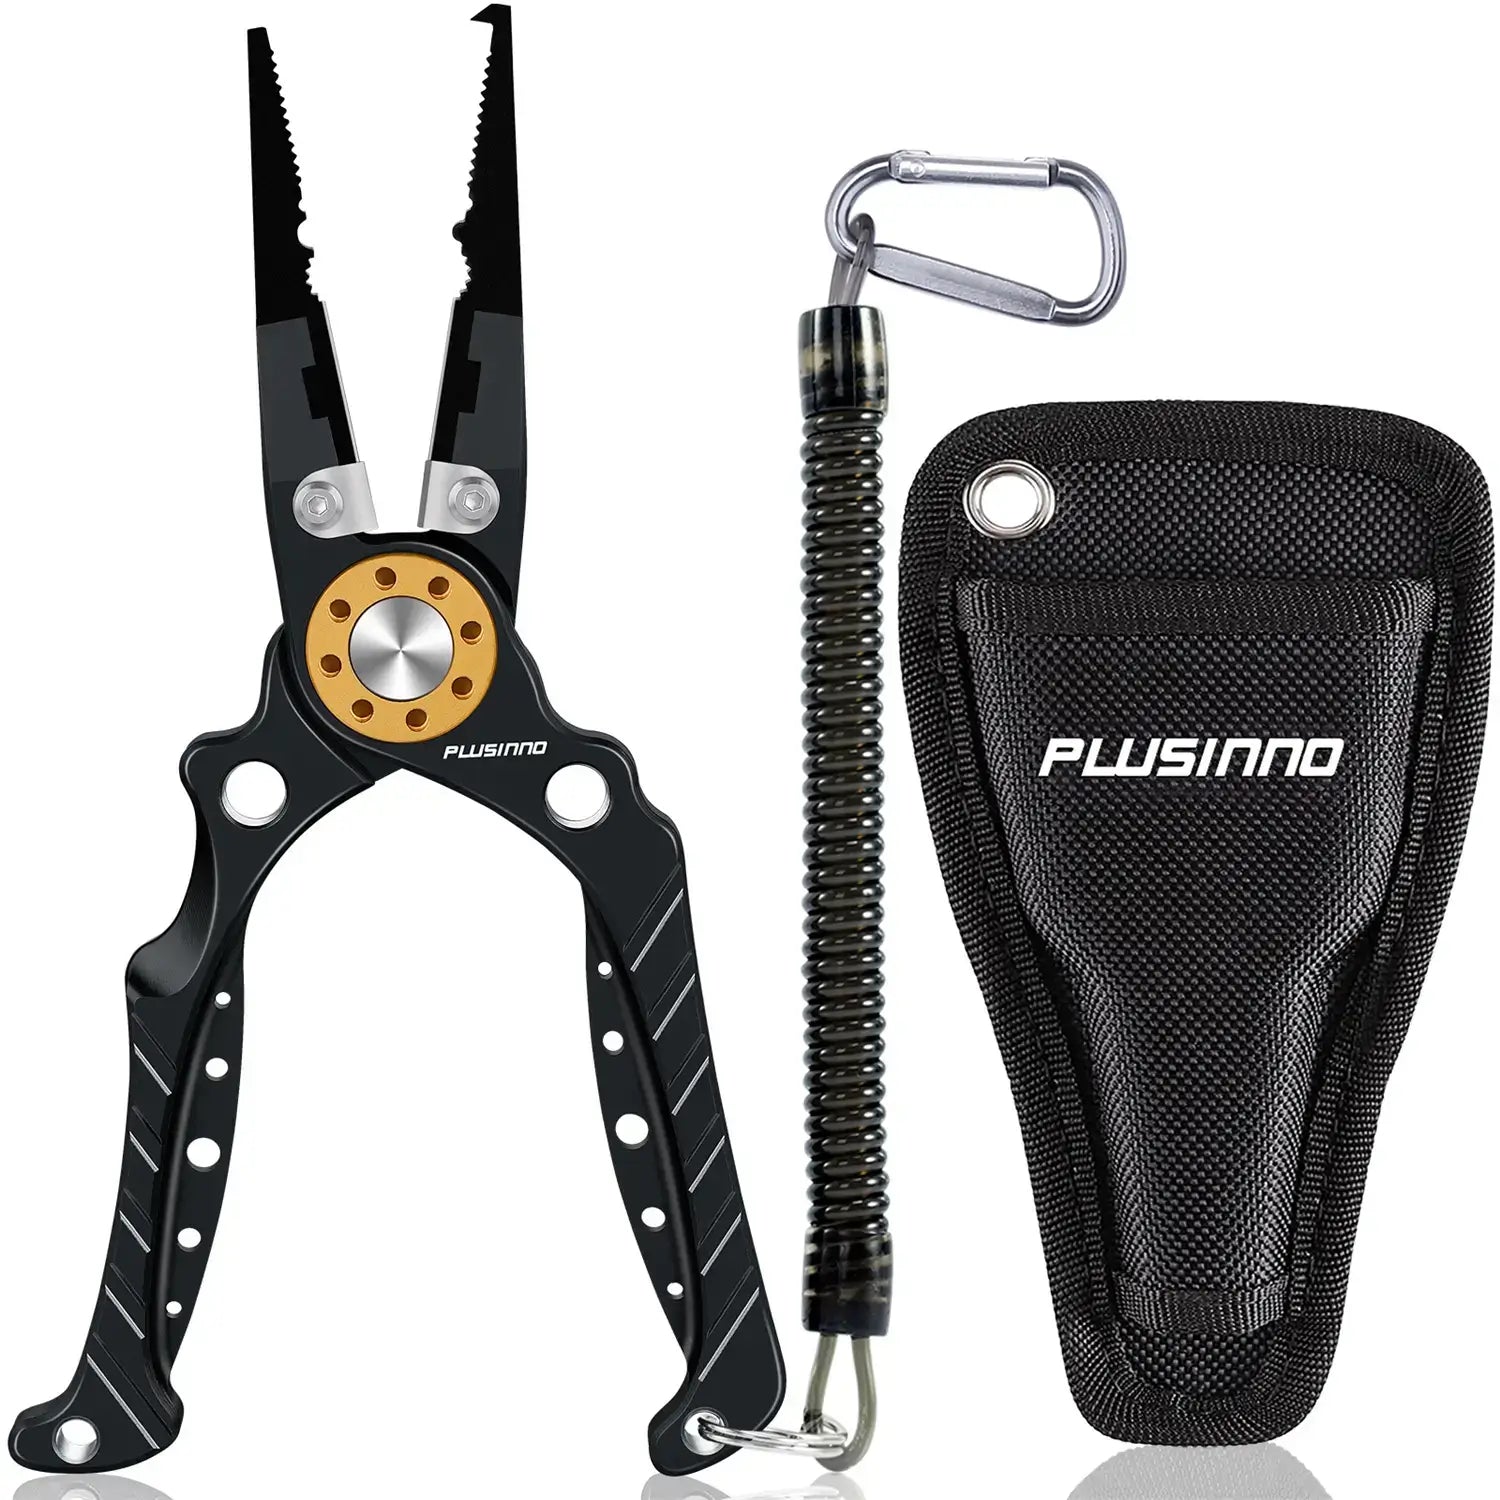 What are Fishing Pliers and Why Do I Need Them?